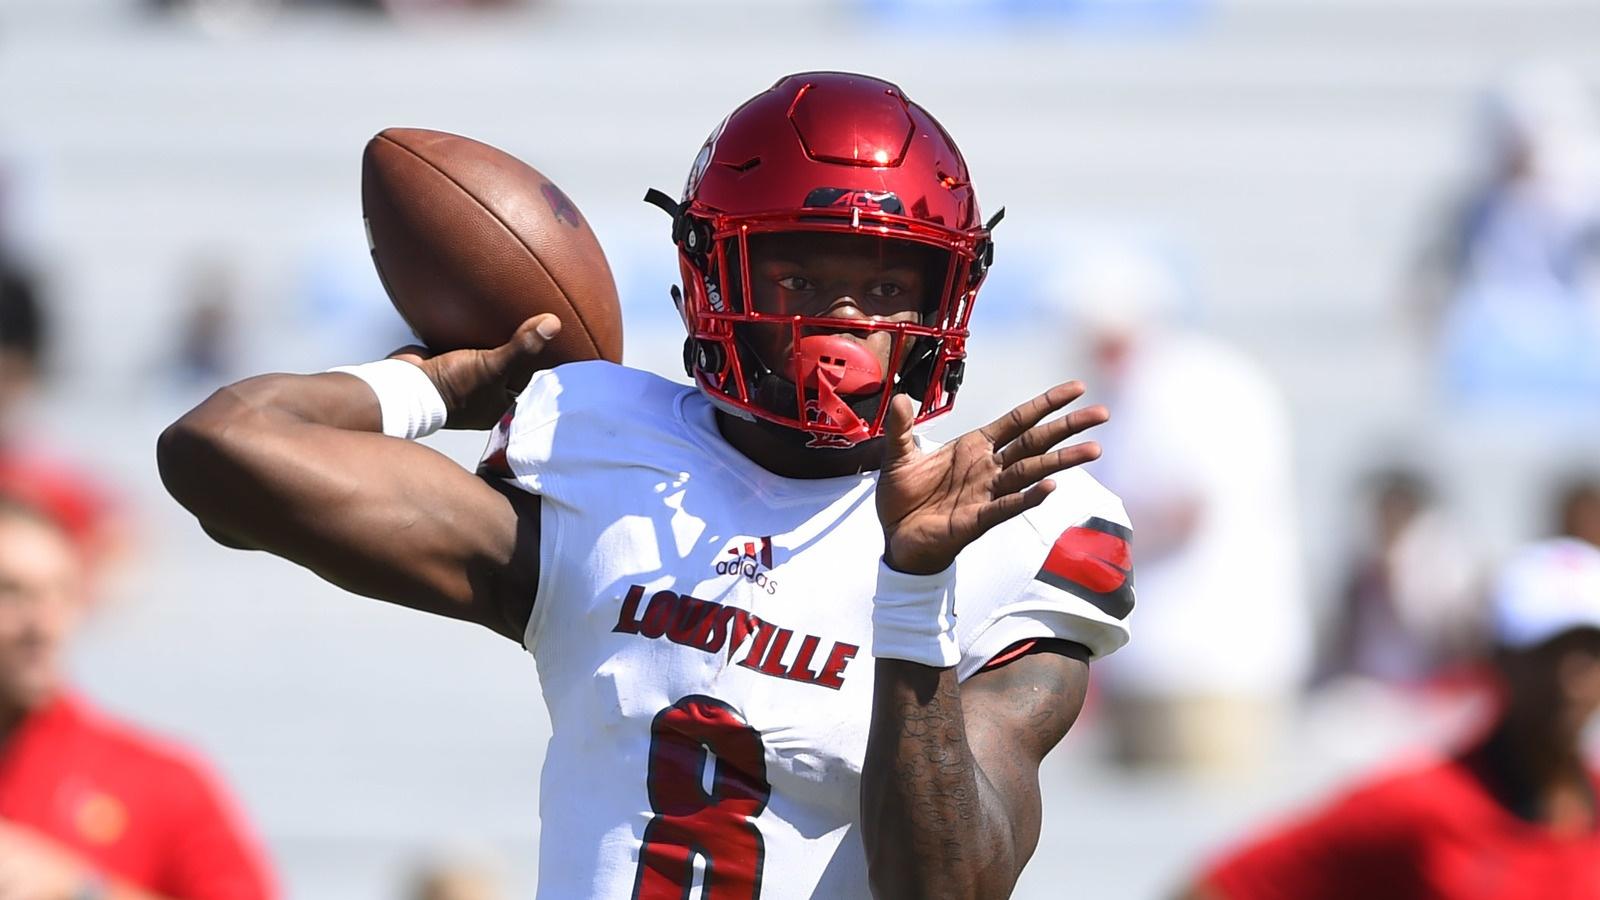 Lamar Jackson selected 32nd overall by the Ravens in 2018